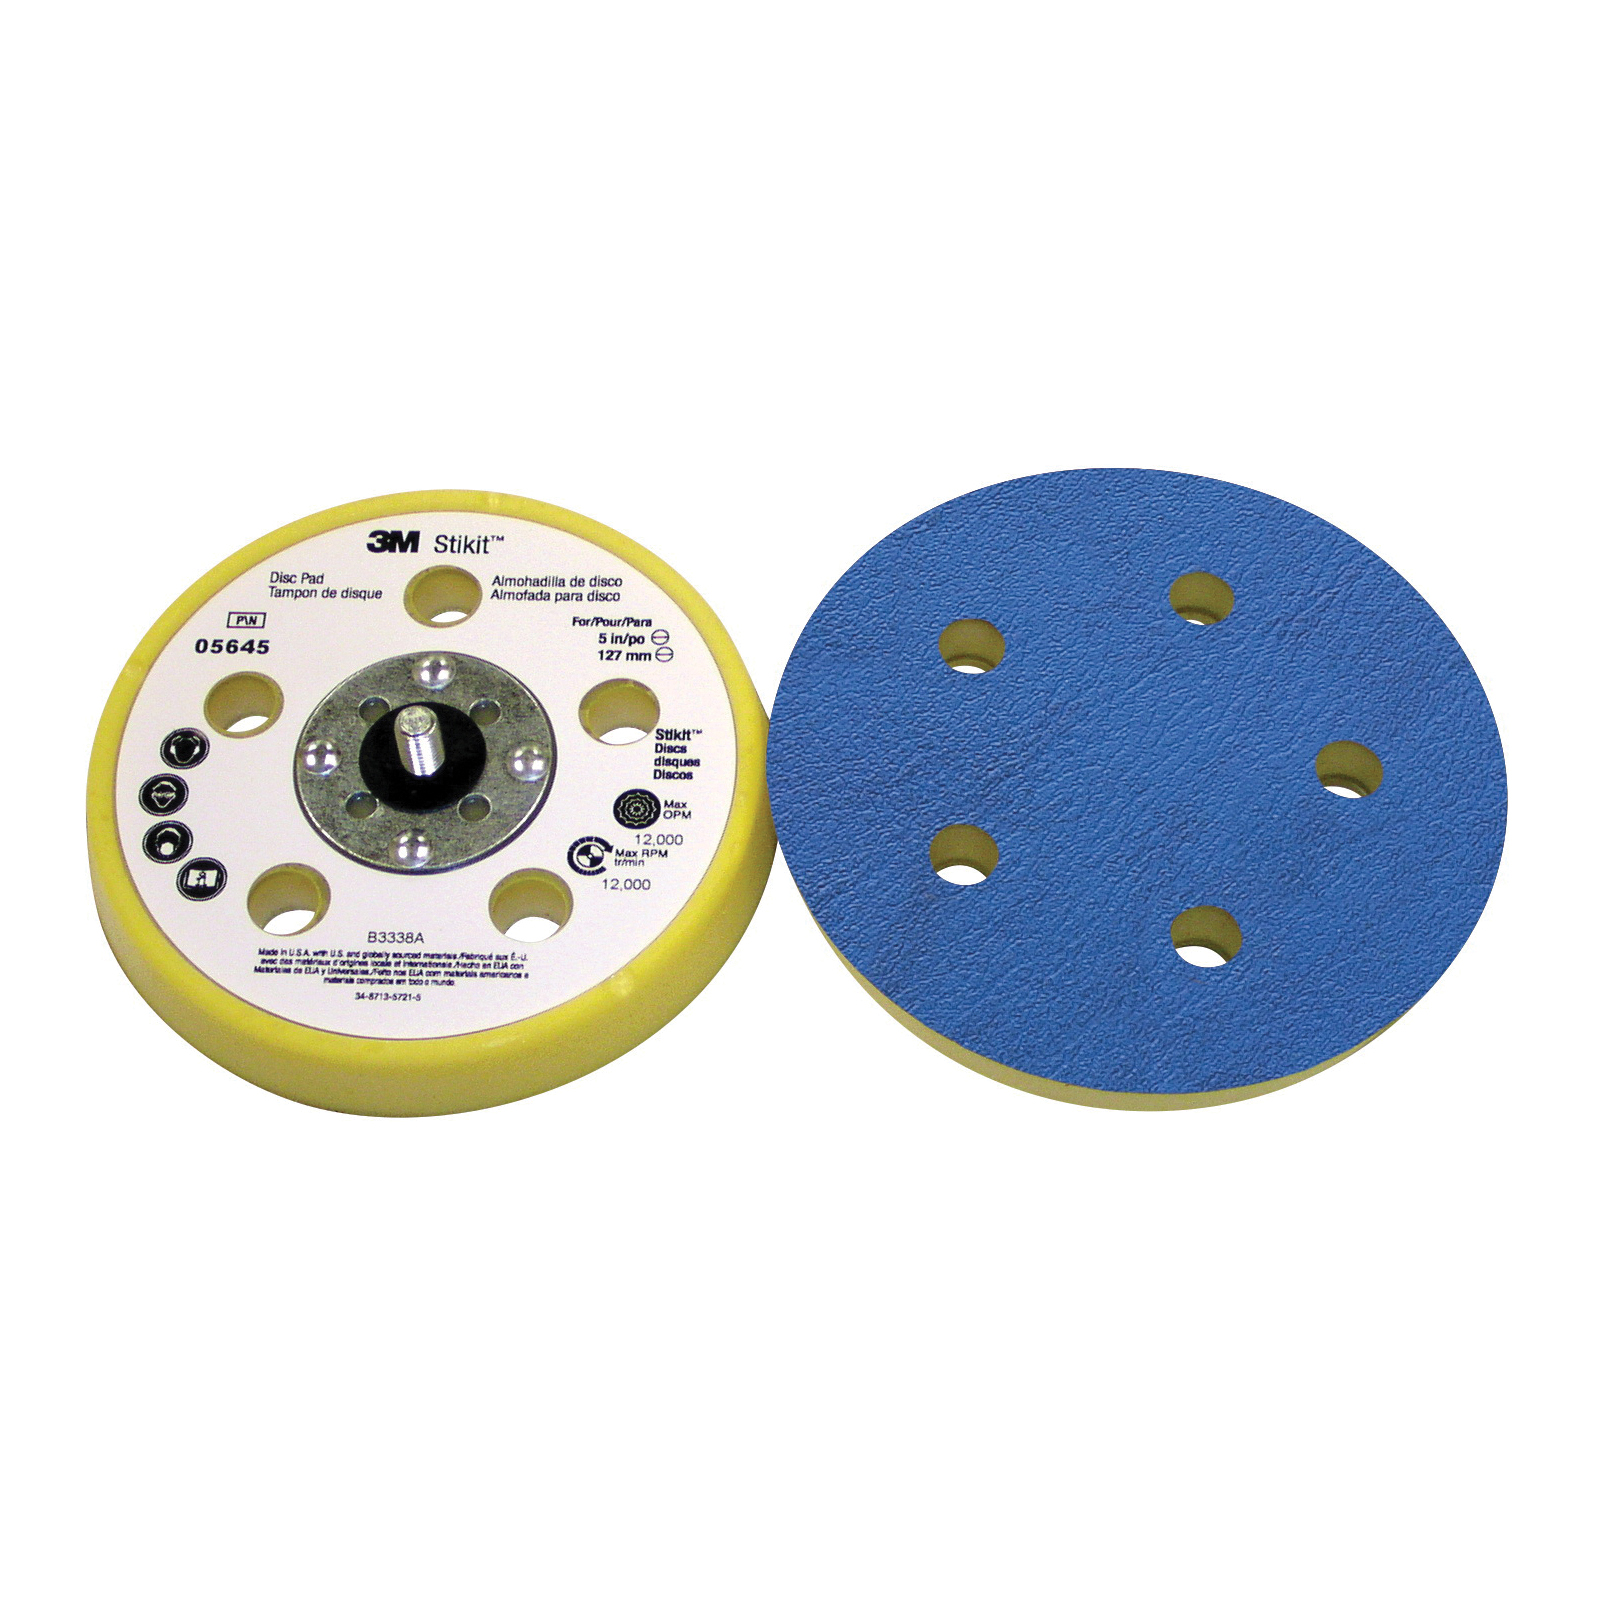 Stikit™ 051141-20351 Adhesive Back Firm Density Regular Disc Pad, 5 in Dia Pad, Stikit™ Attachment